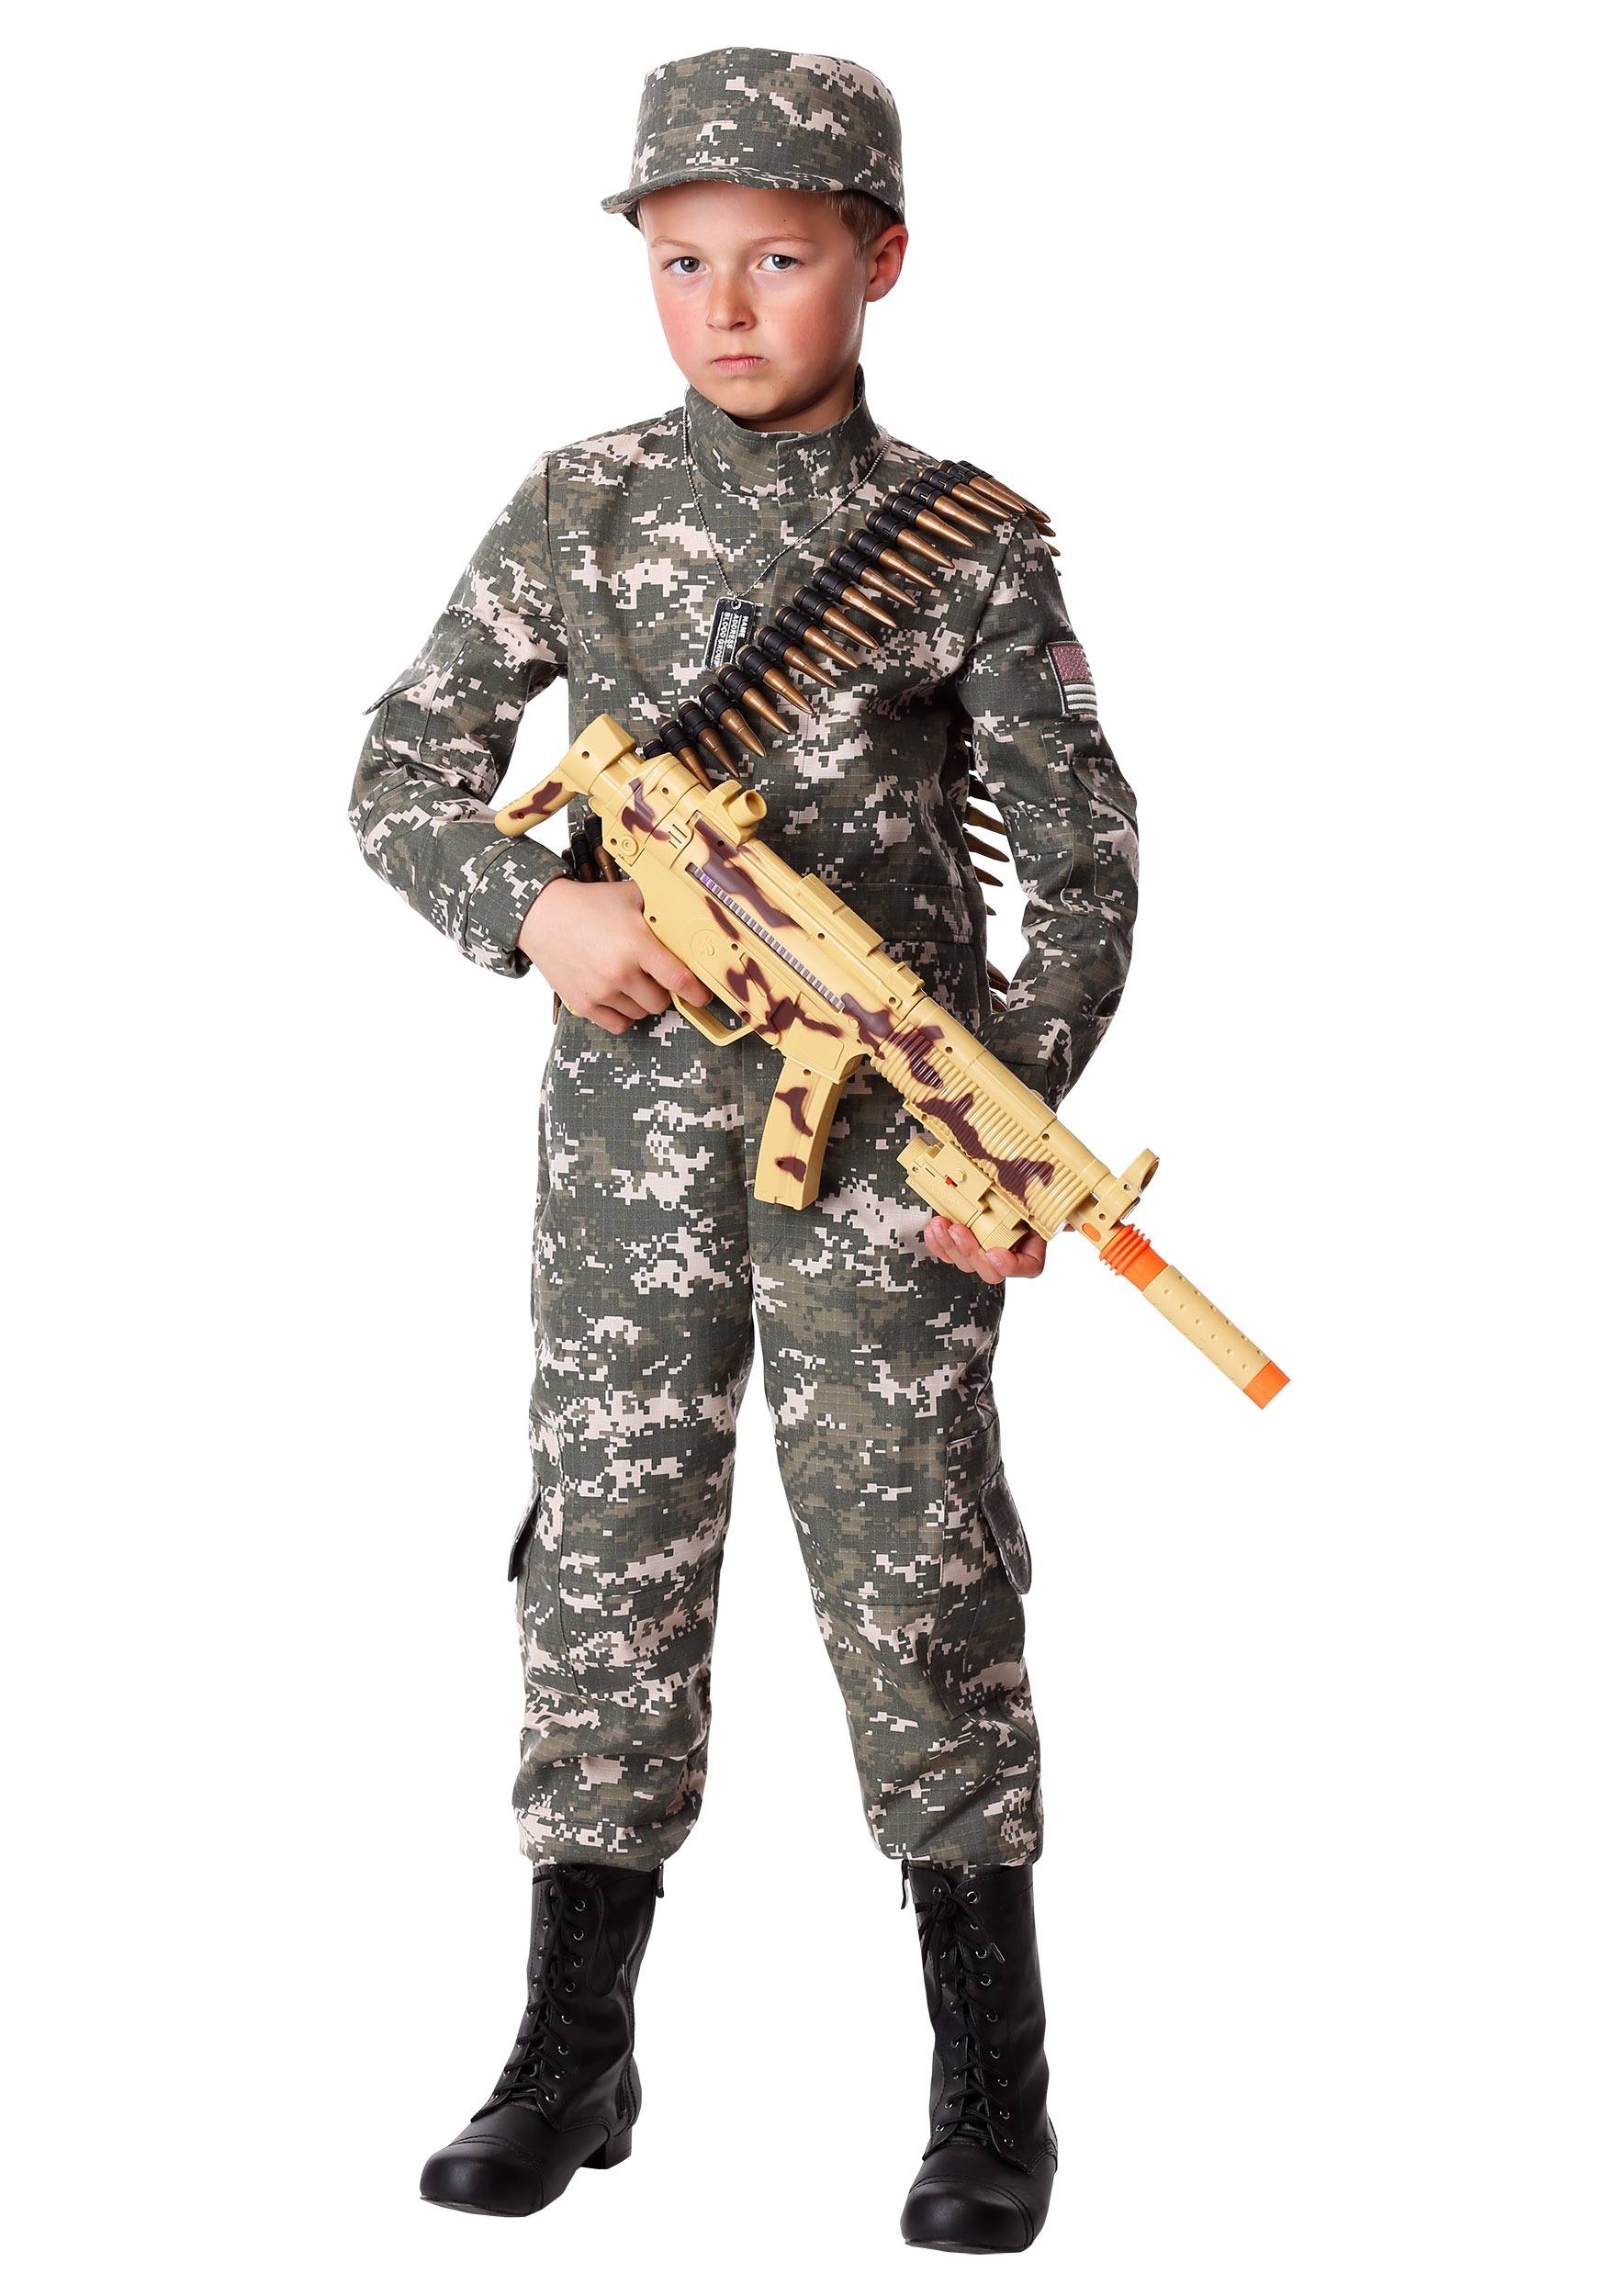 Boys Army Military Costume Child Camouflage Soldier Book Week Halloween